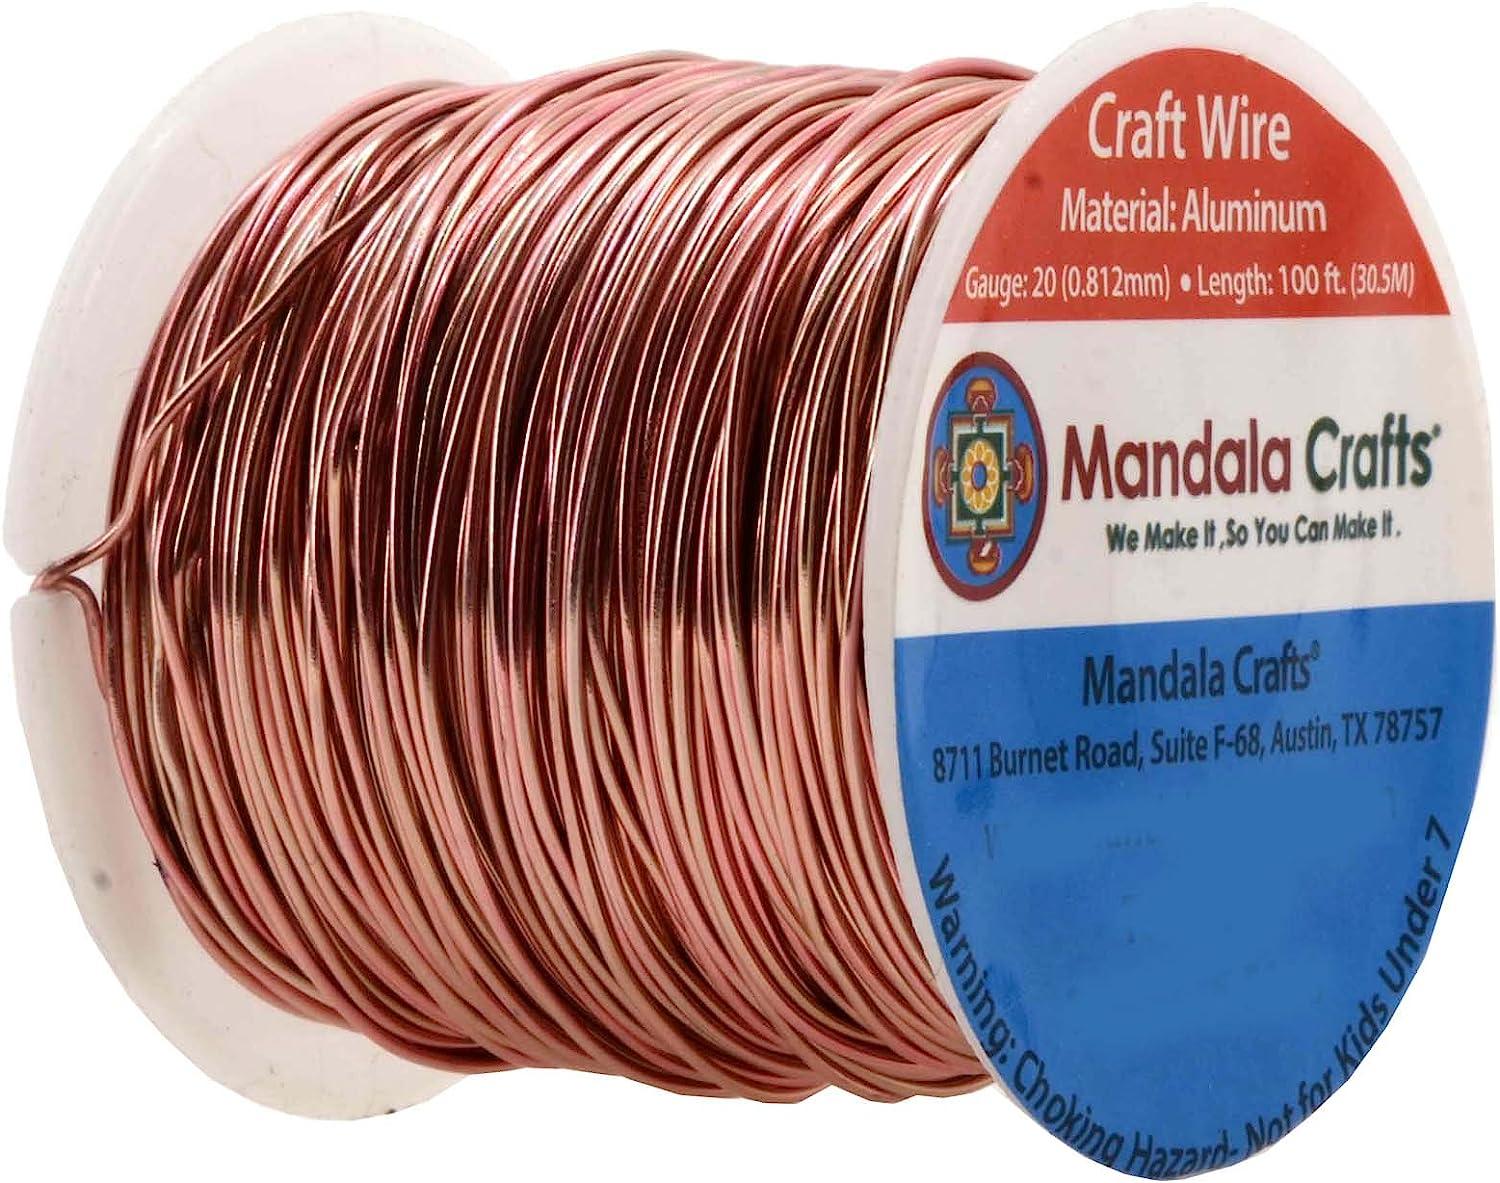 Copper Craft Wire, Parawire 26ga Natural Enameled 200' Roll